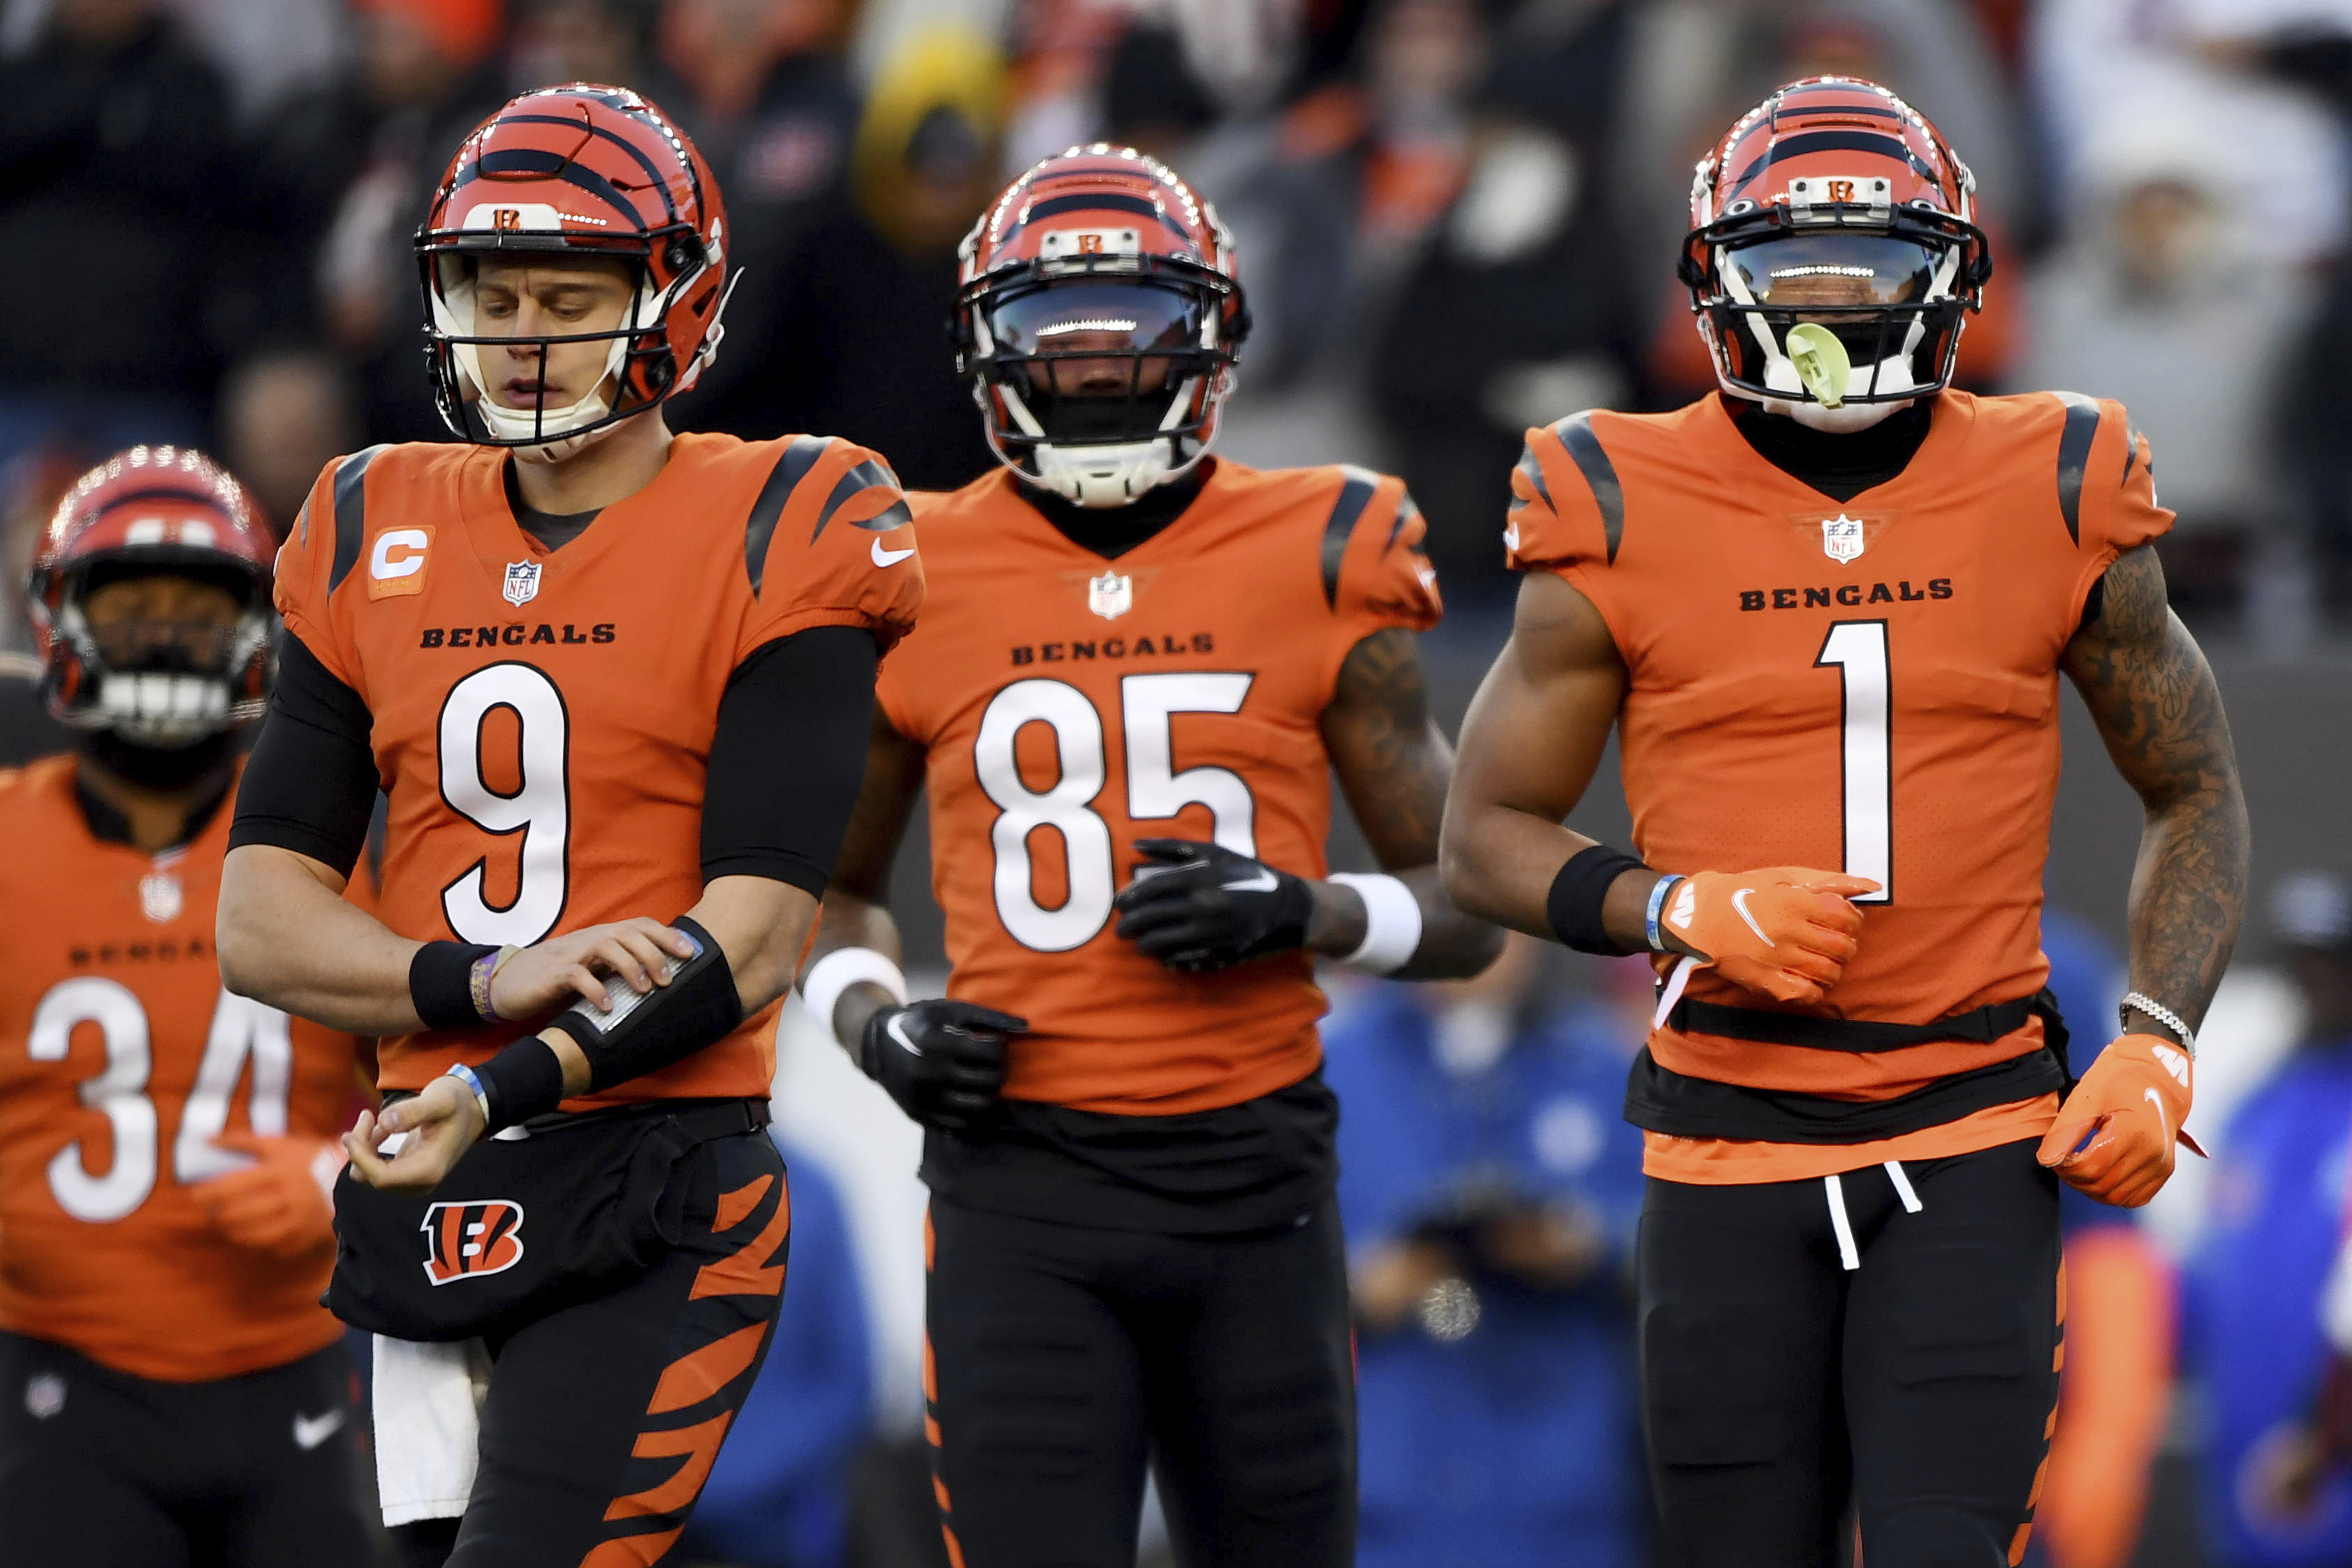 With the Cincinnati Bengals making the Super Bowl, area school districts  are canceling classes the Monday after the game